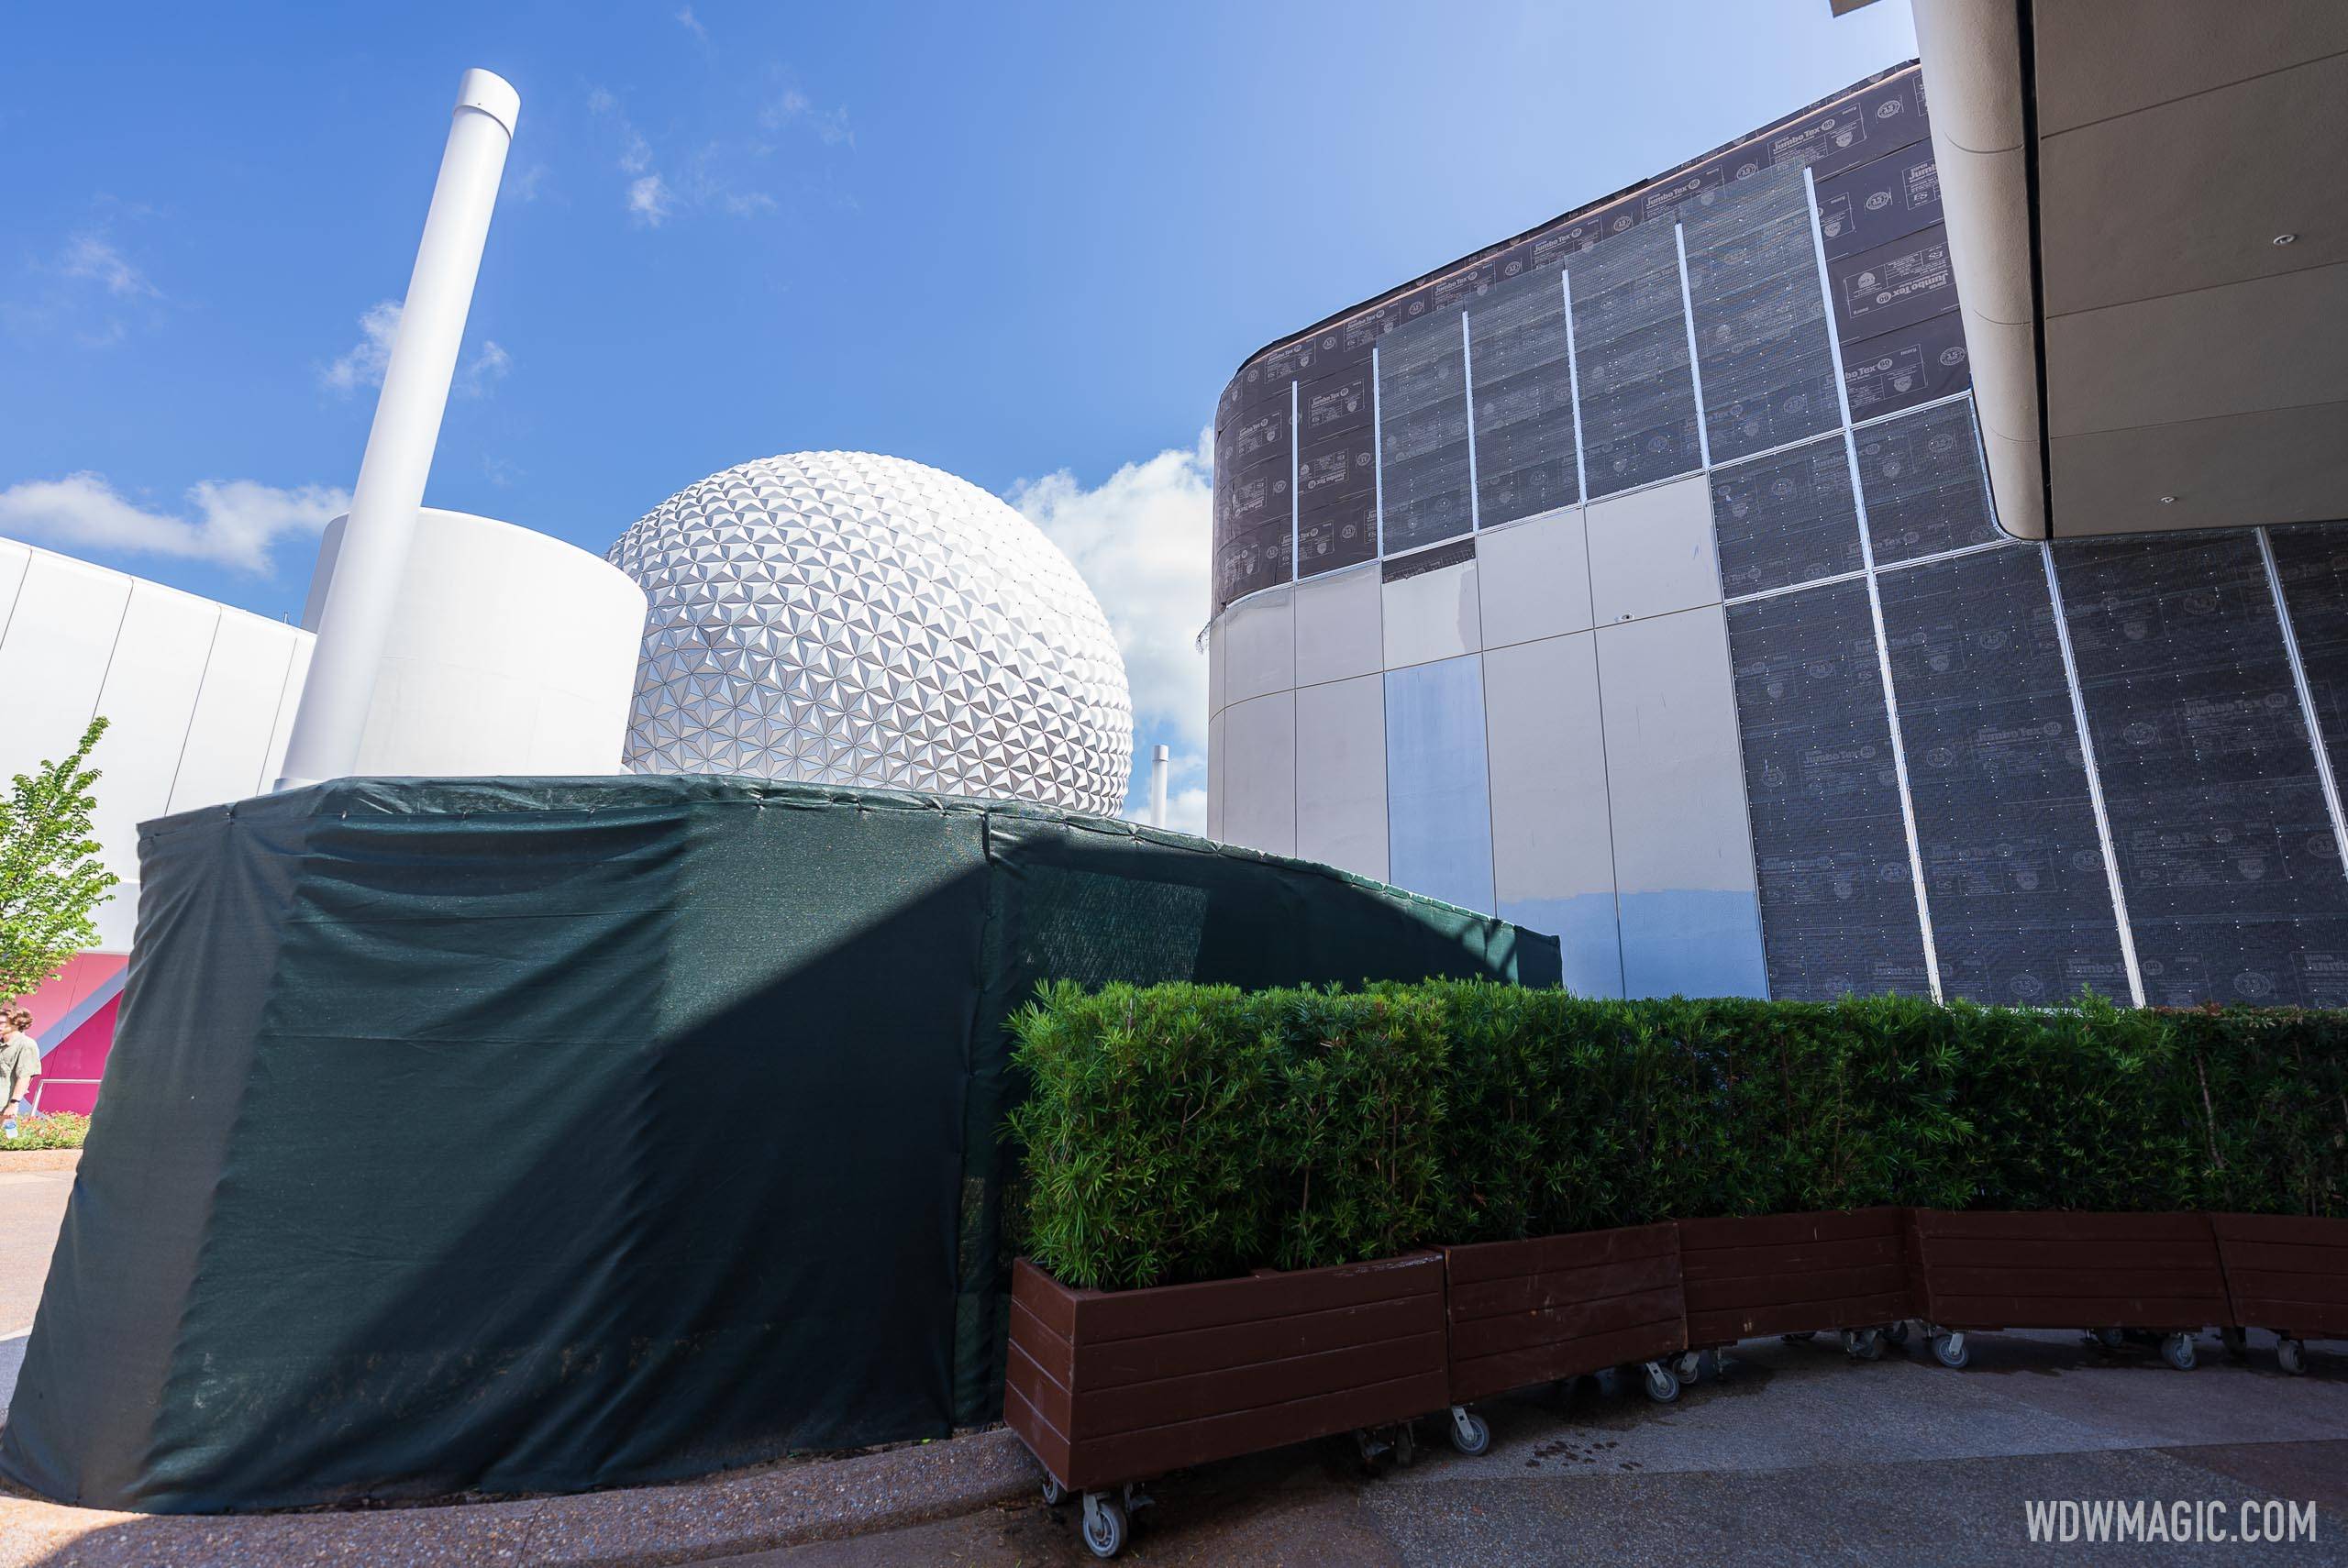 Updated EPCOT Guest Relations sign and exterior - May 16 2022